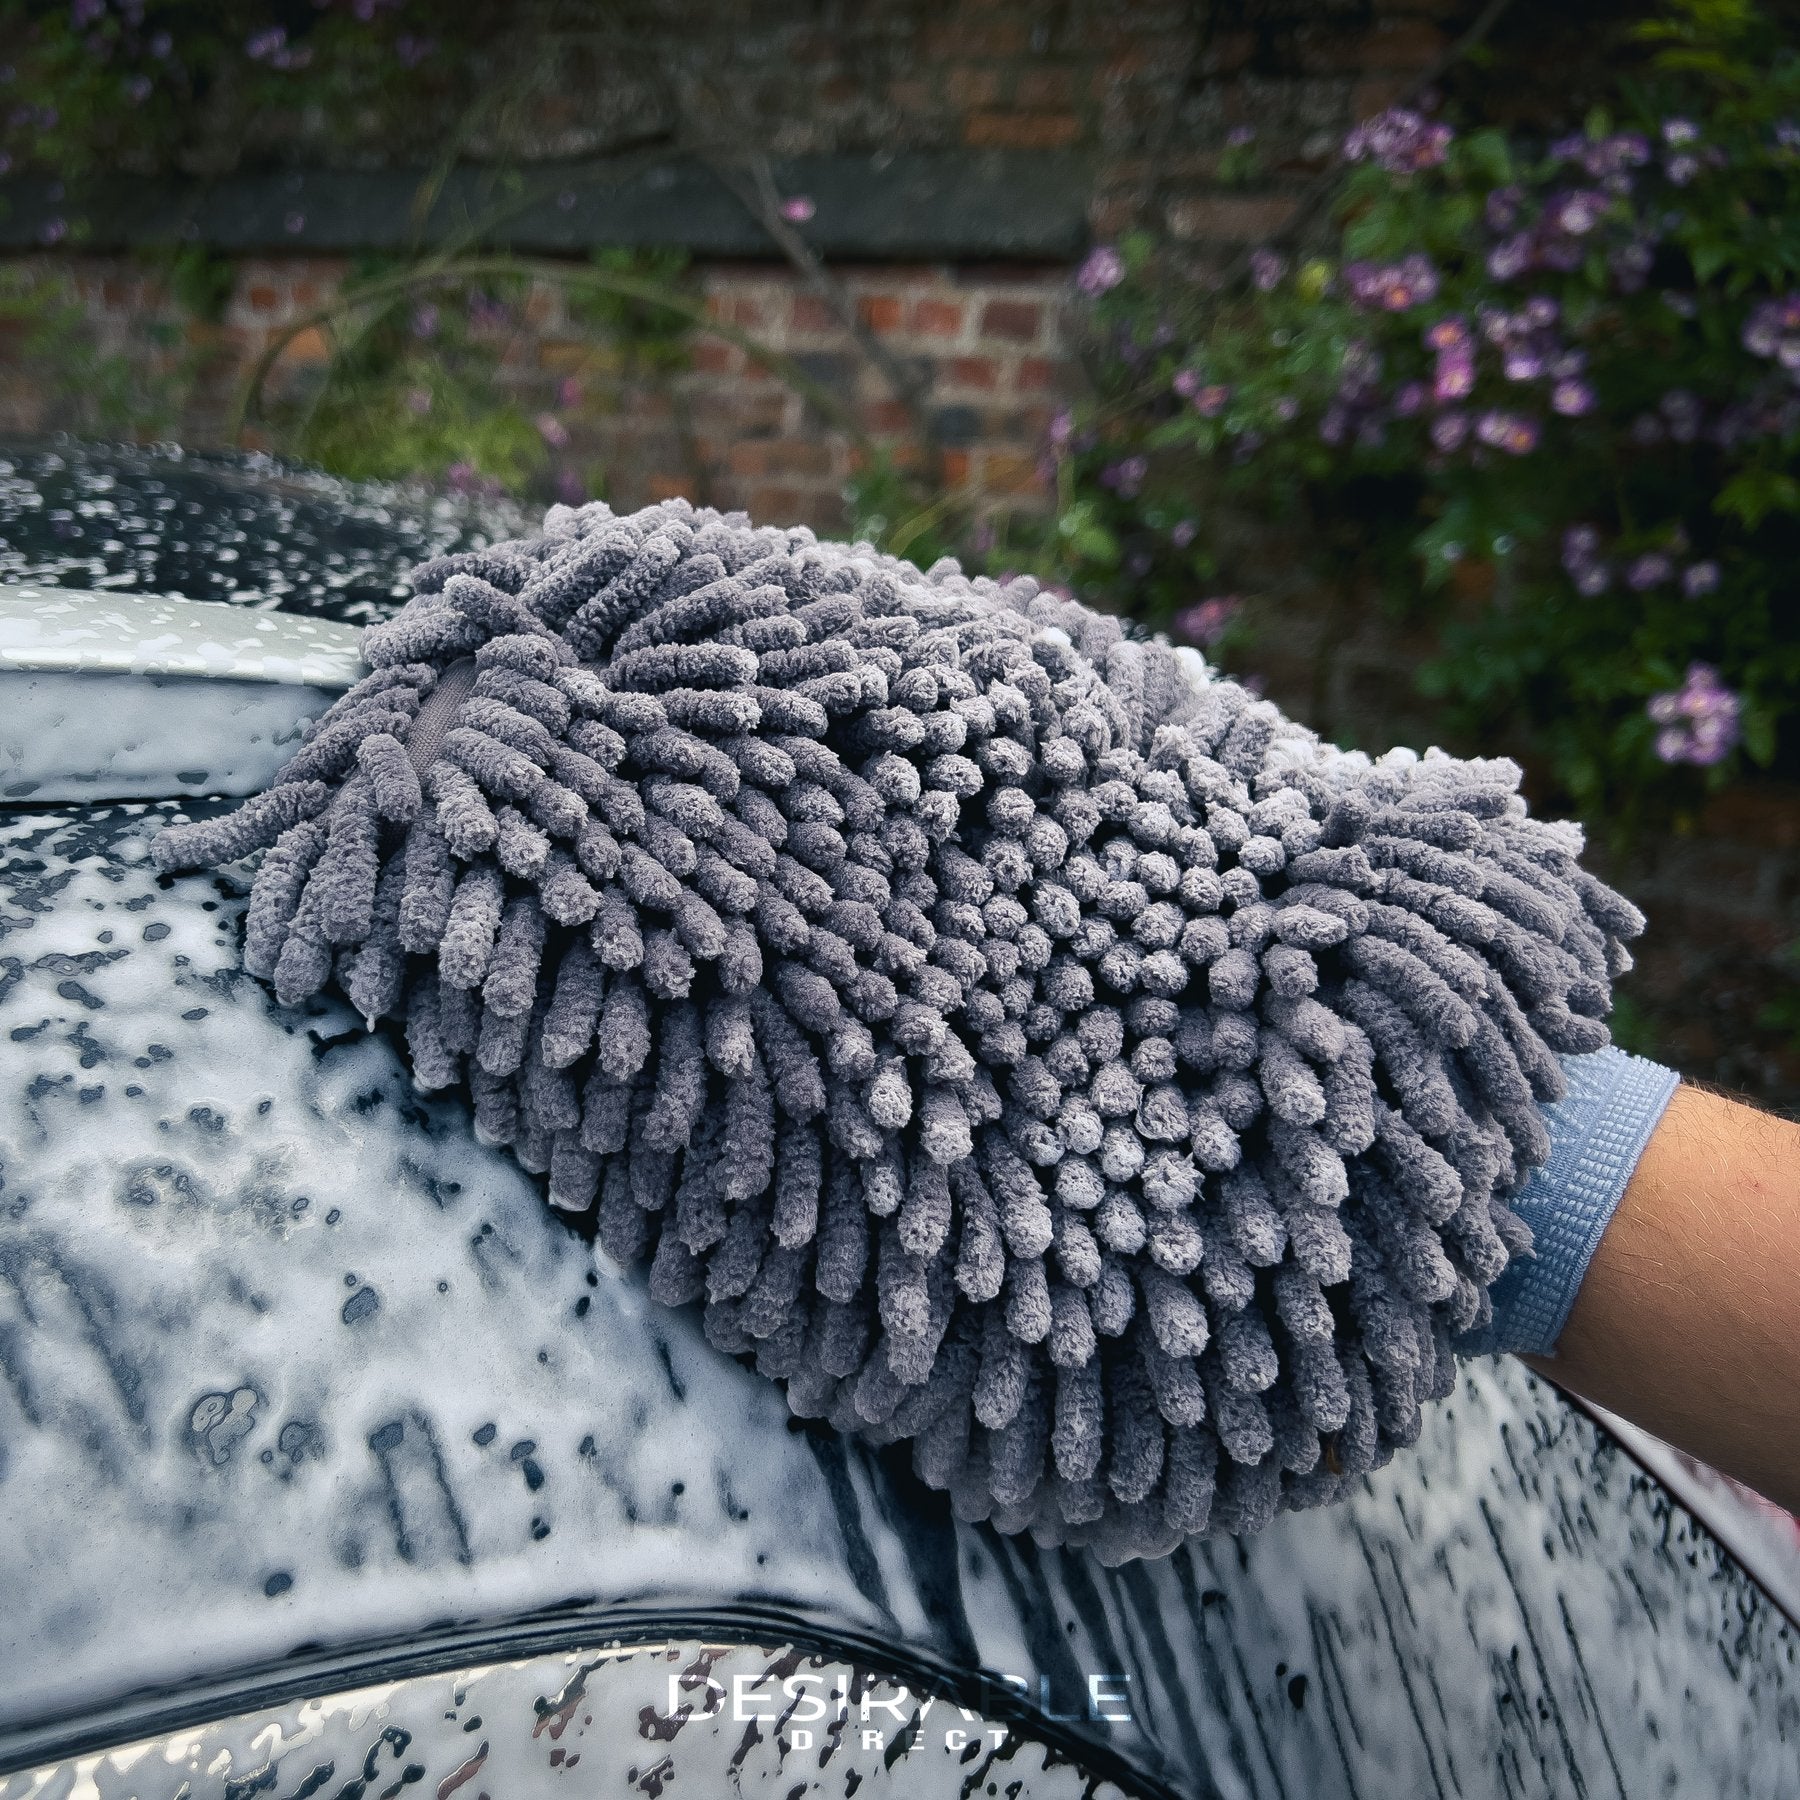 Car care noodle chenille grey wash mitt cleaning the top section of a grey car covered in car shampoo. With a wall and pink flowers in the background.